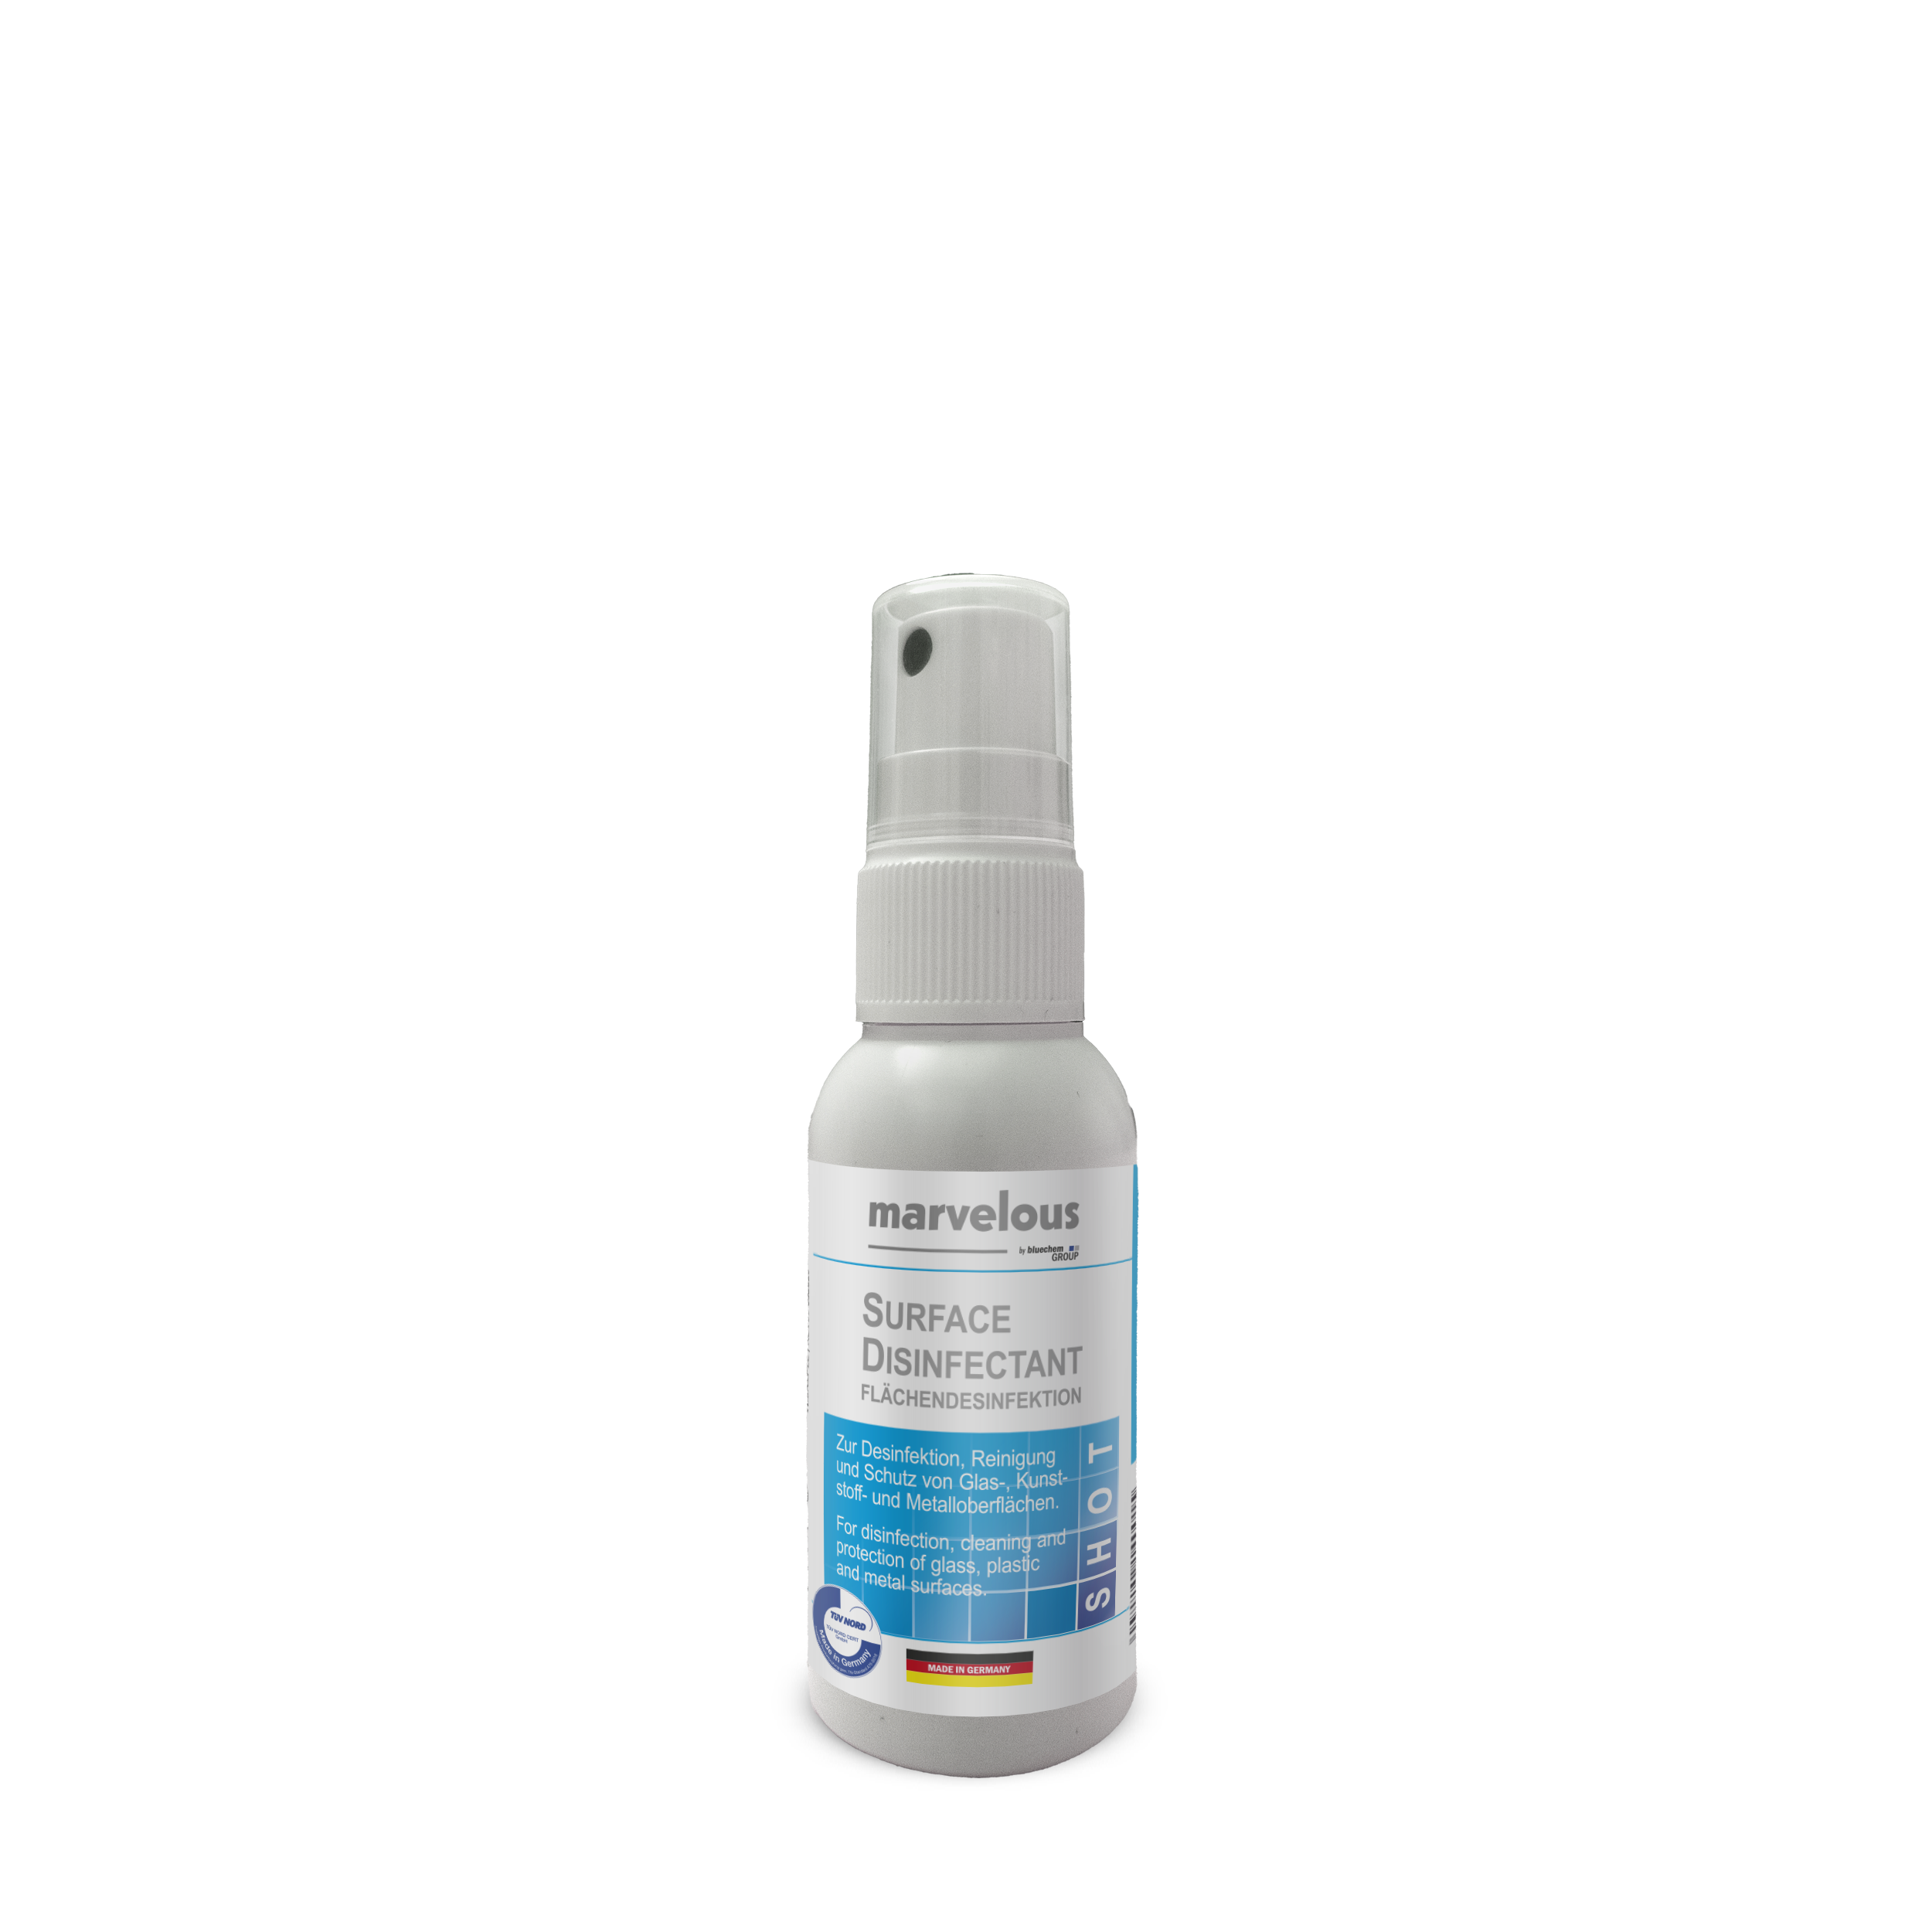 marvelous Surface Disinfectant 50ml